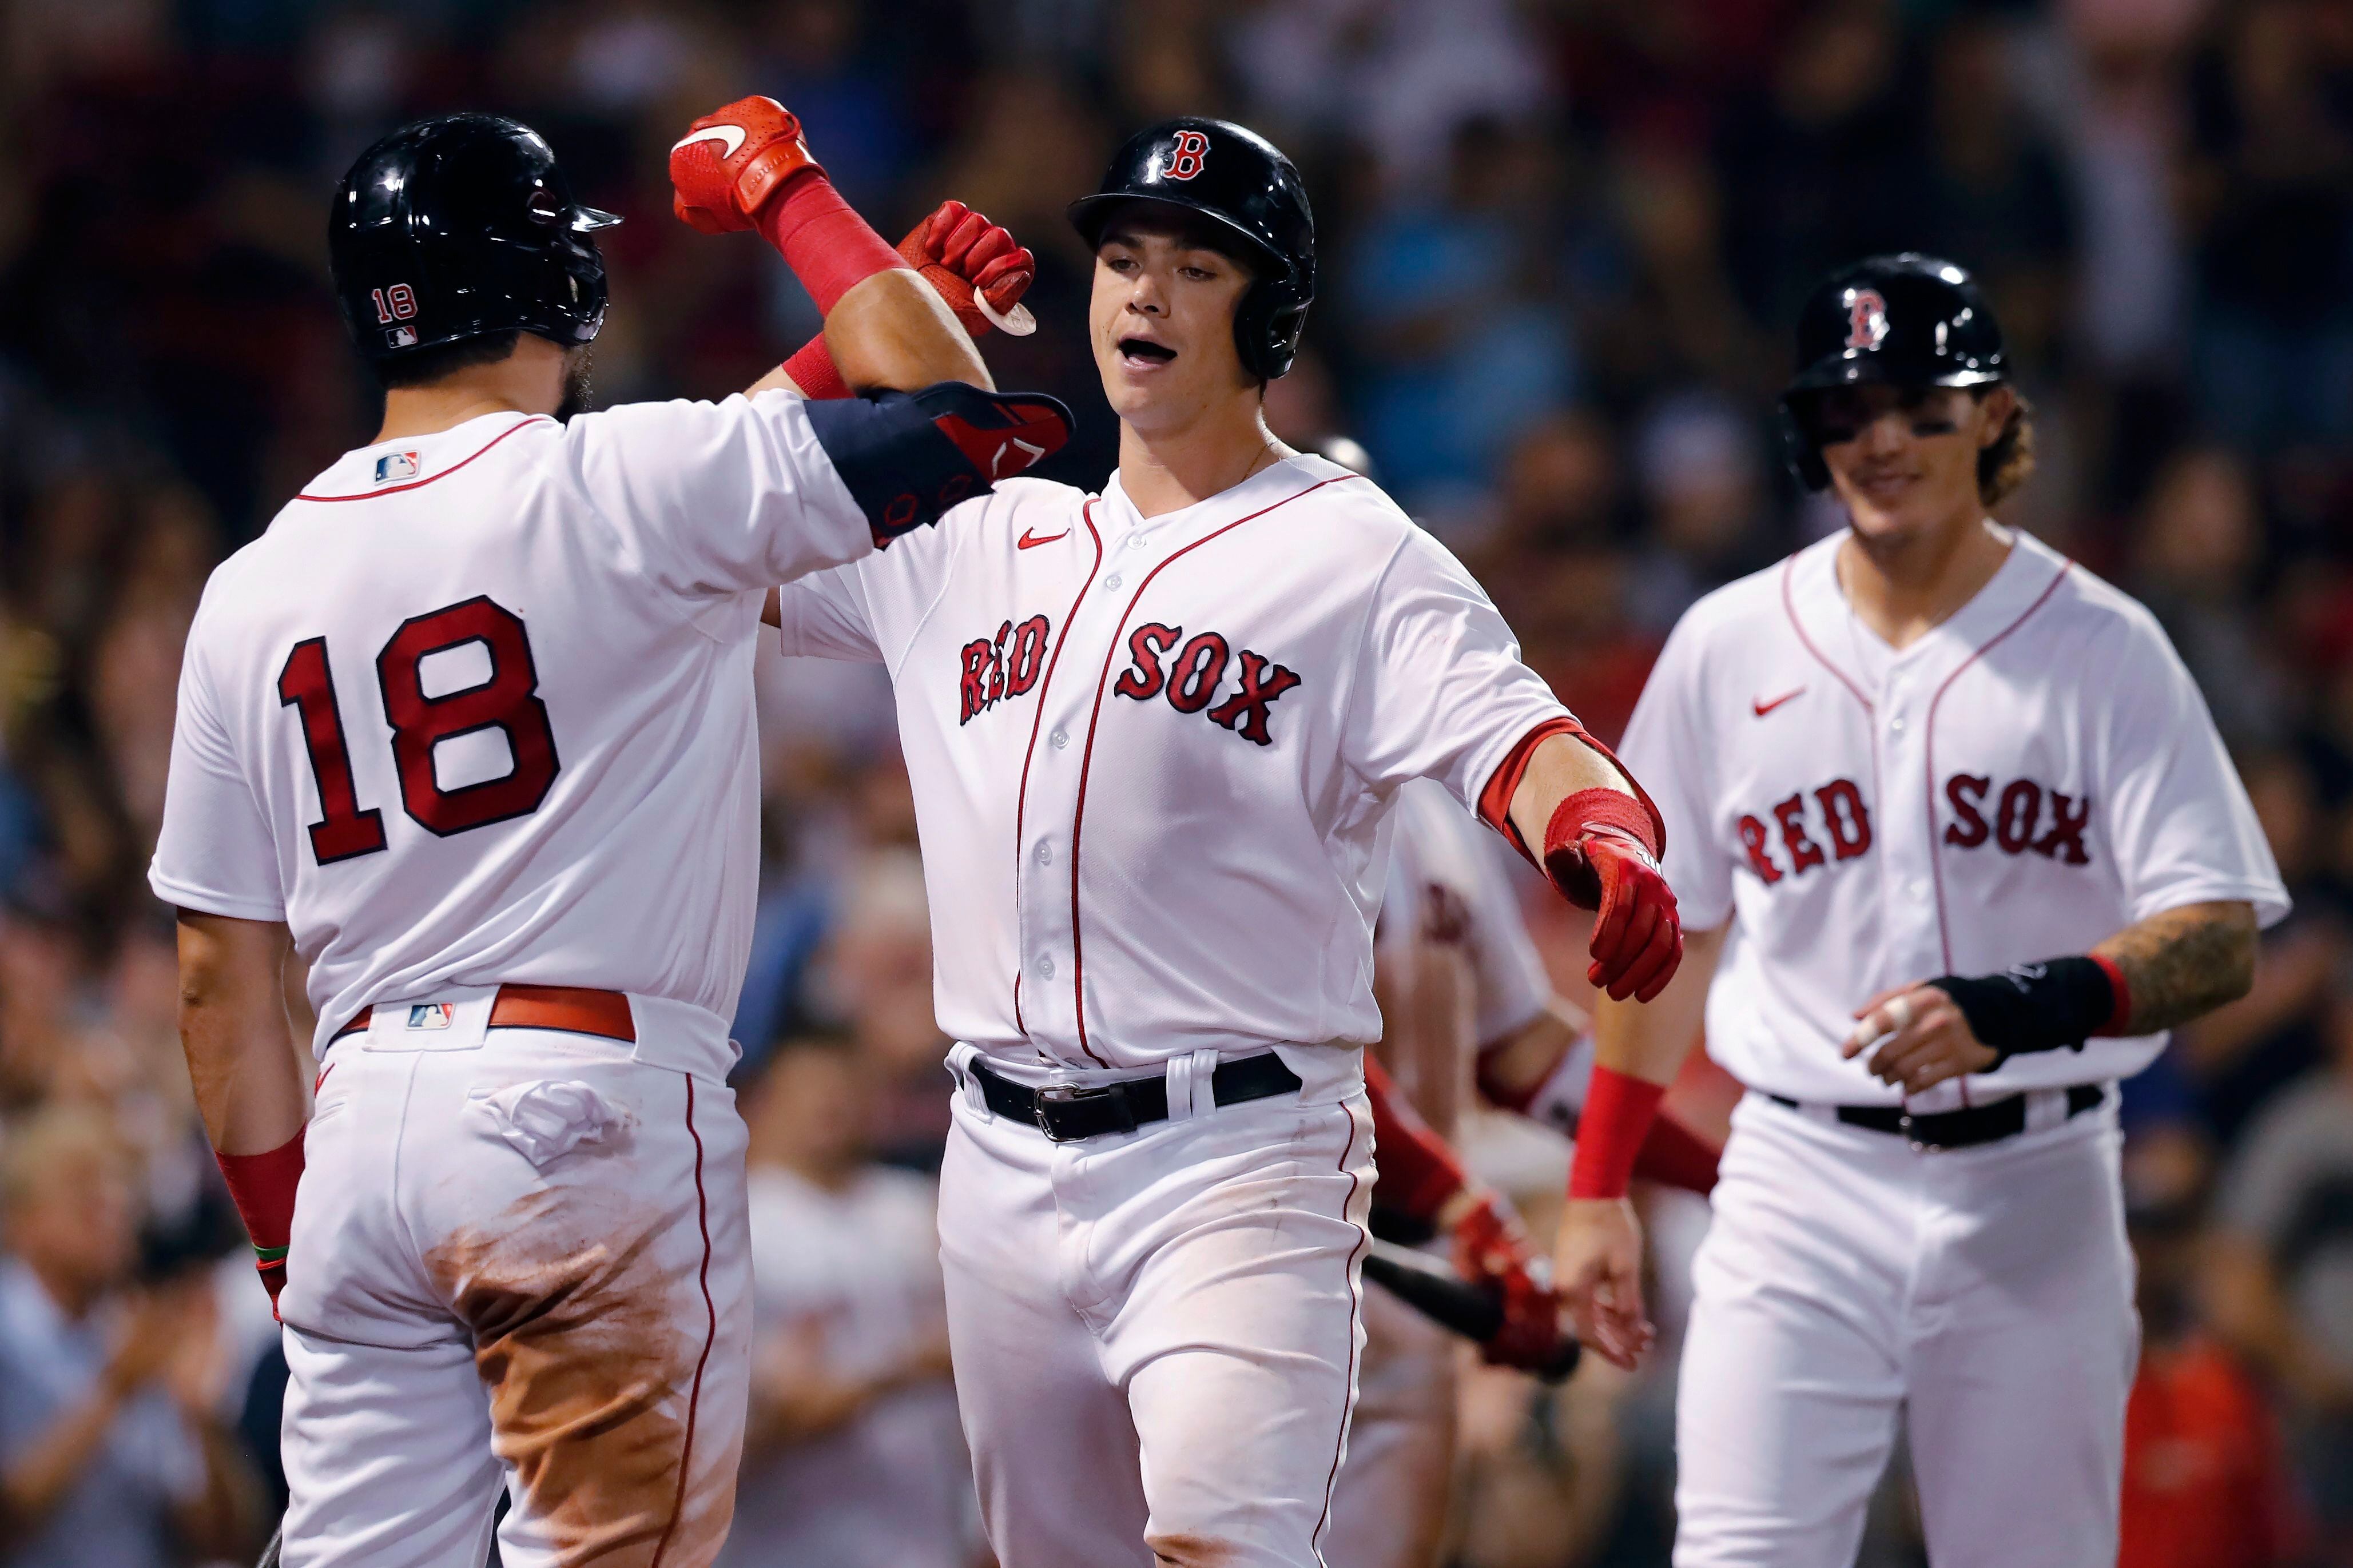 Dalbec leads Red Sox in rout of Twins – Lowell Sun